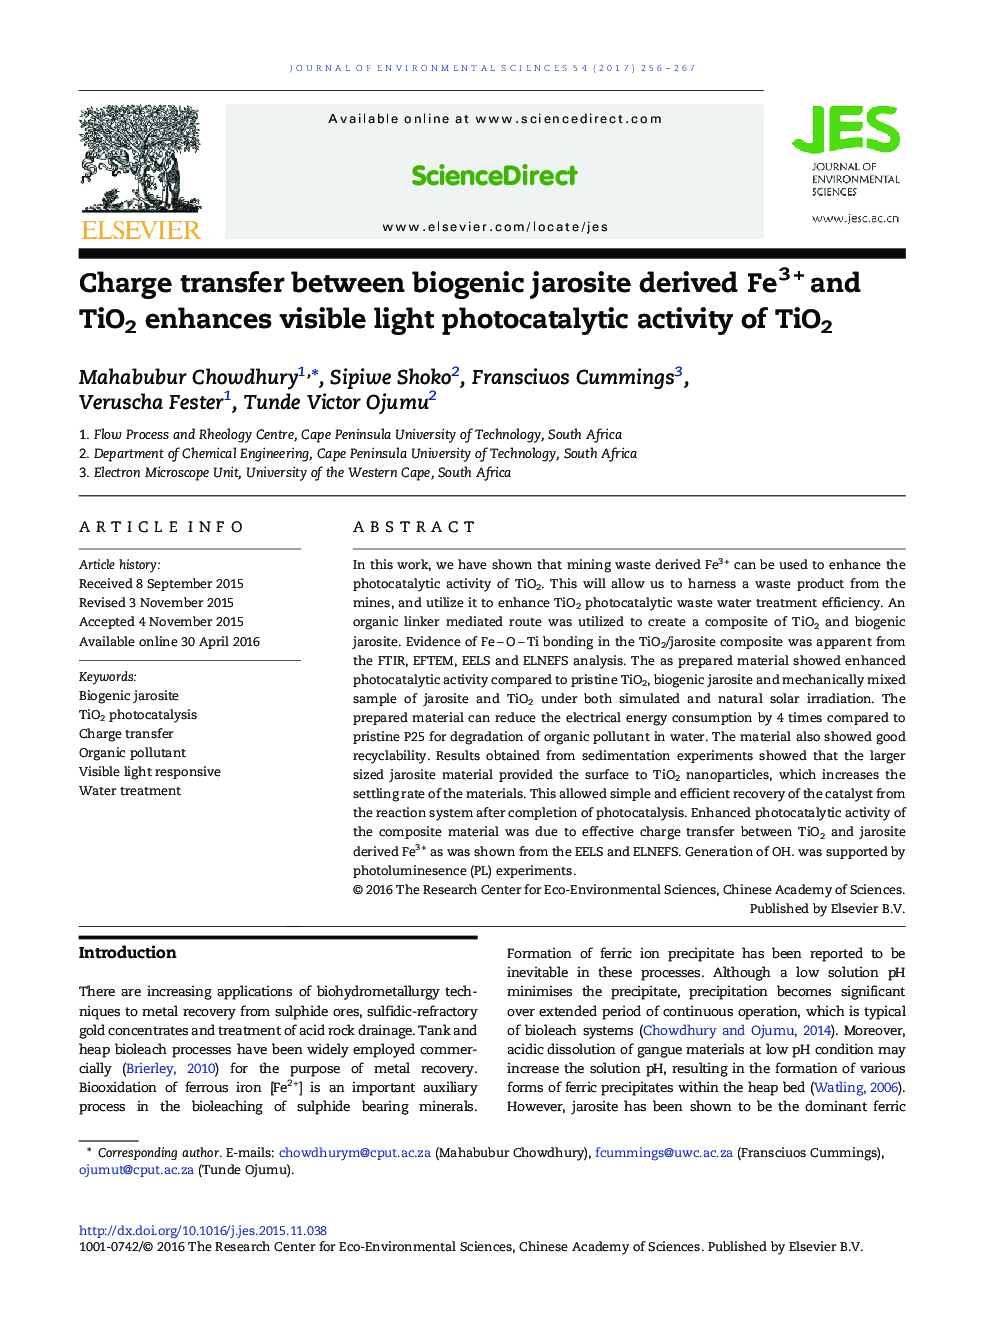 Charge transfer between biogenic jarosite derived Fe3Â +Â and TiO2 enhances visible light photocatalytic activity of TiO2